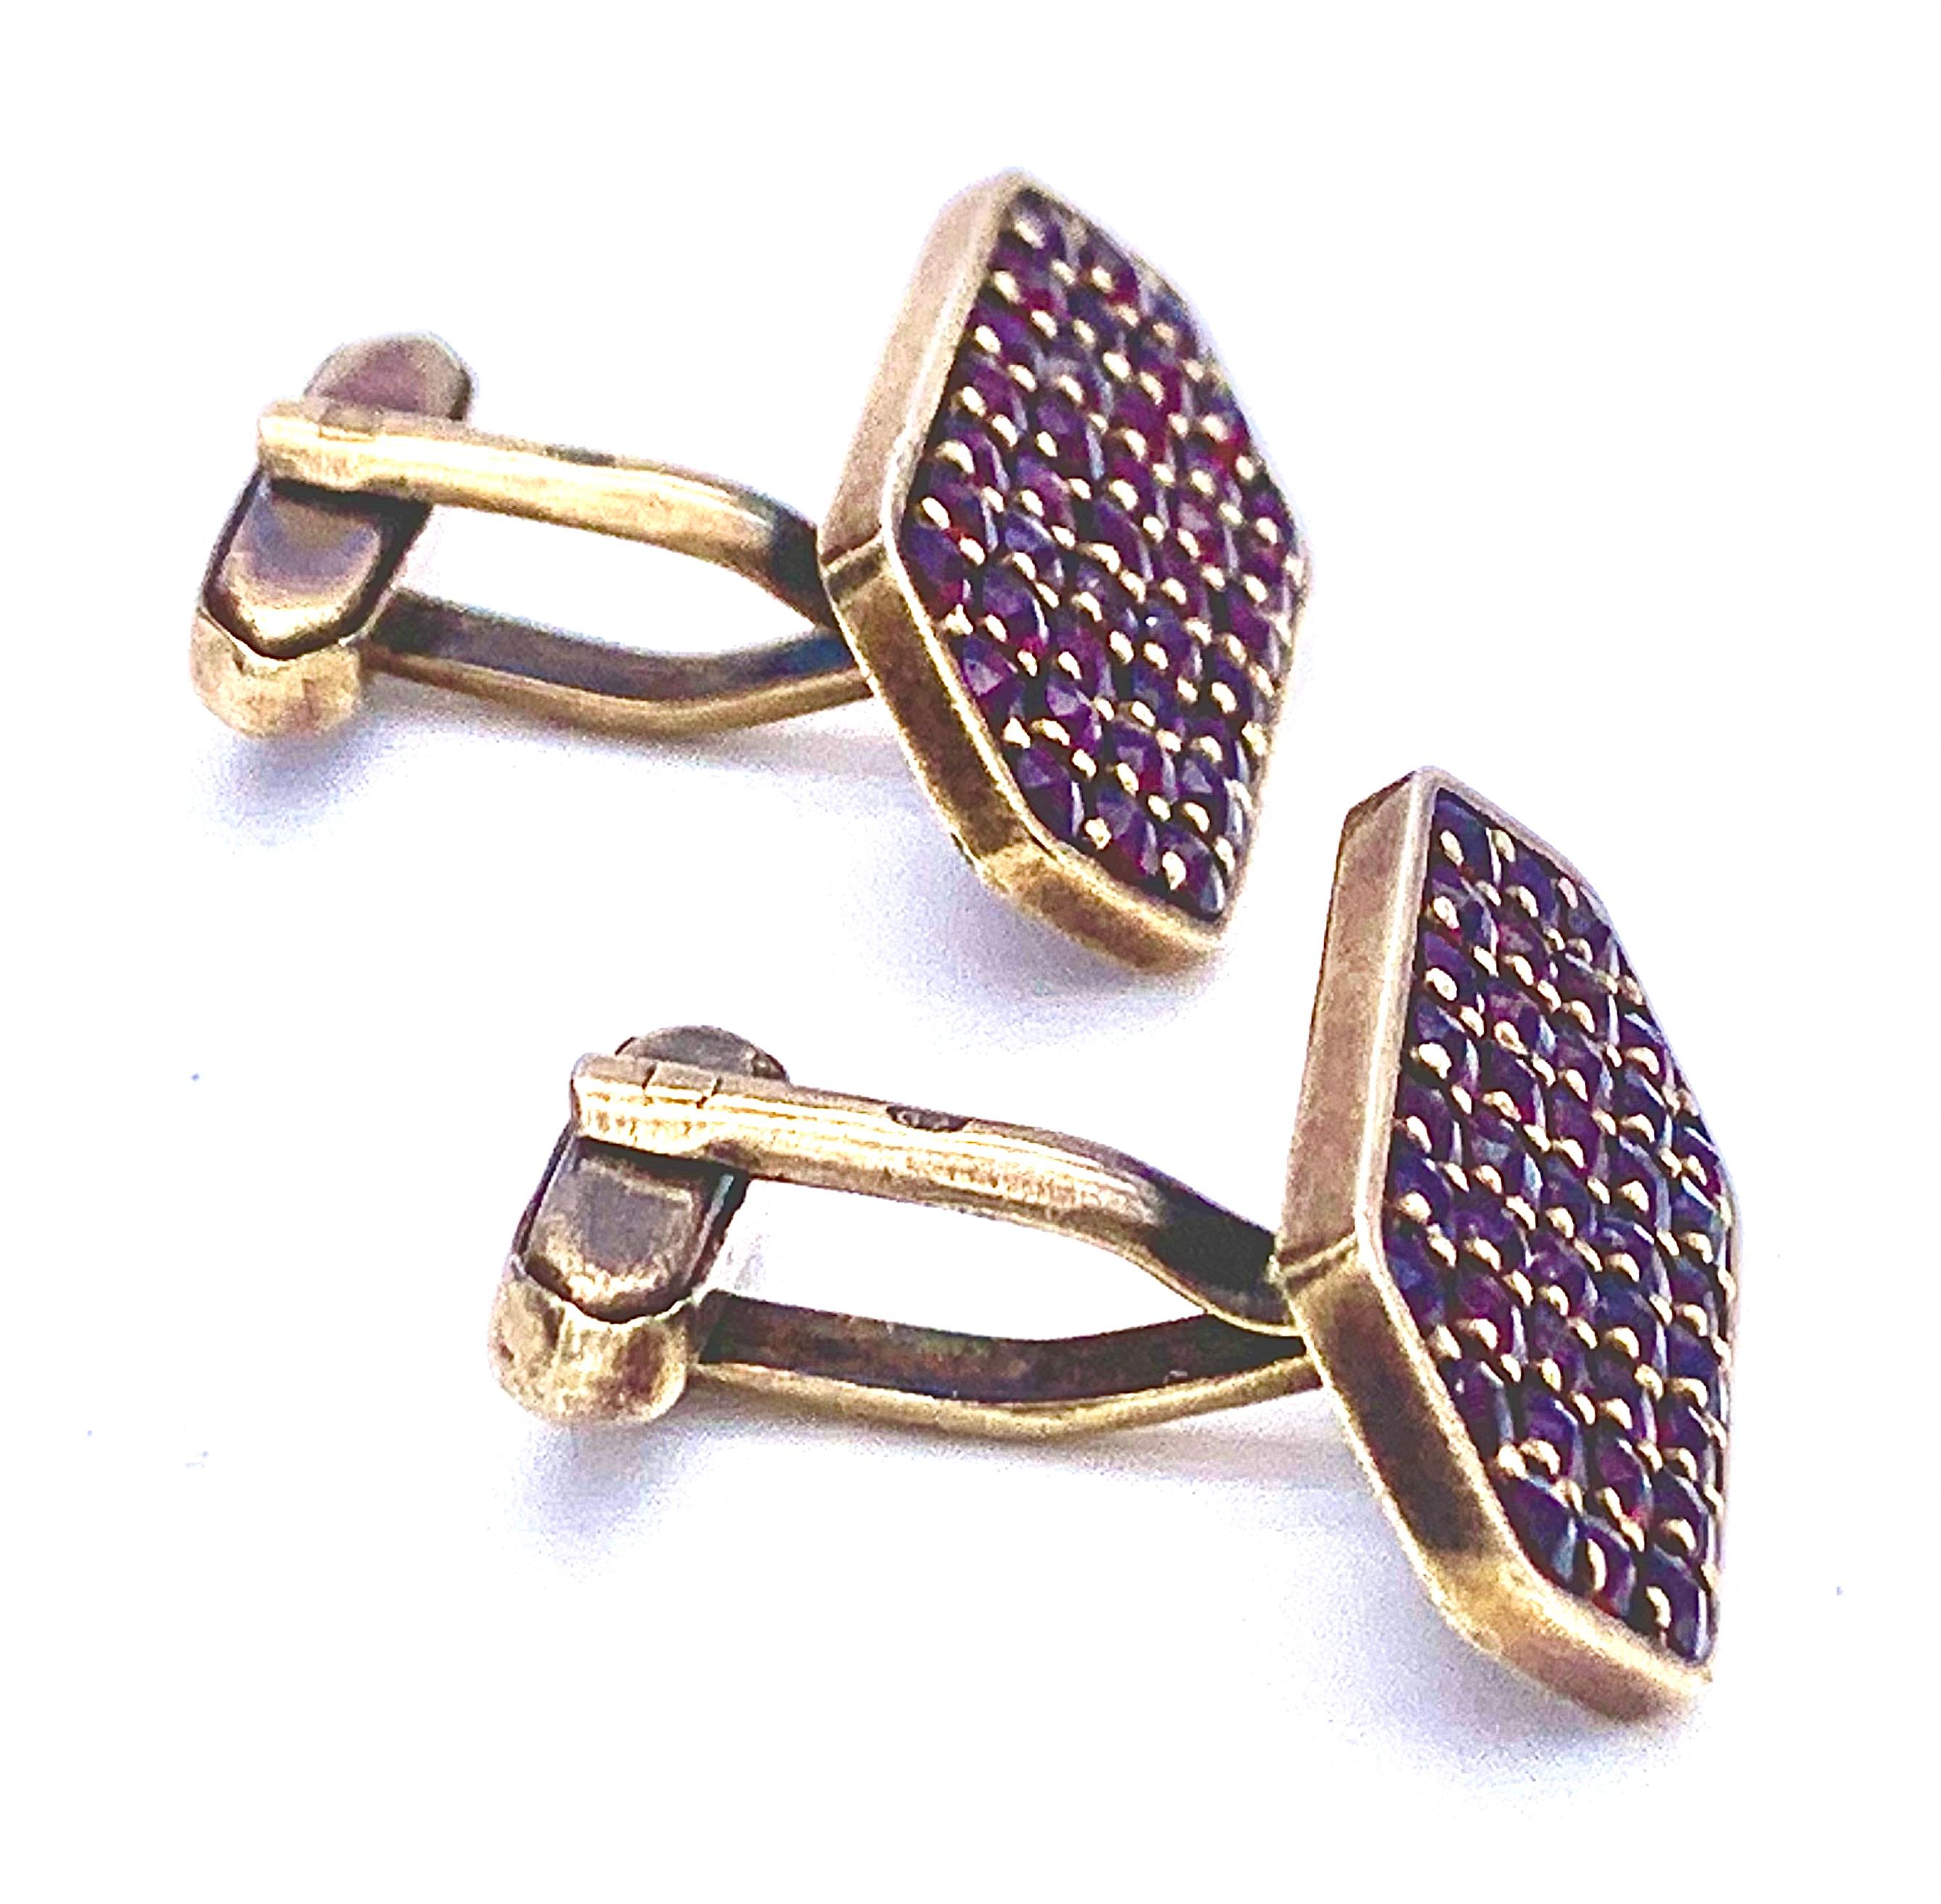 The hexagonal cufflinks are made out of silver and guilt in a red gold hue. They have been set with round cut bohemian garnets. 